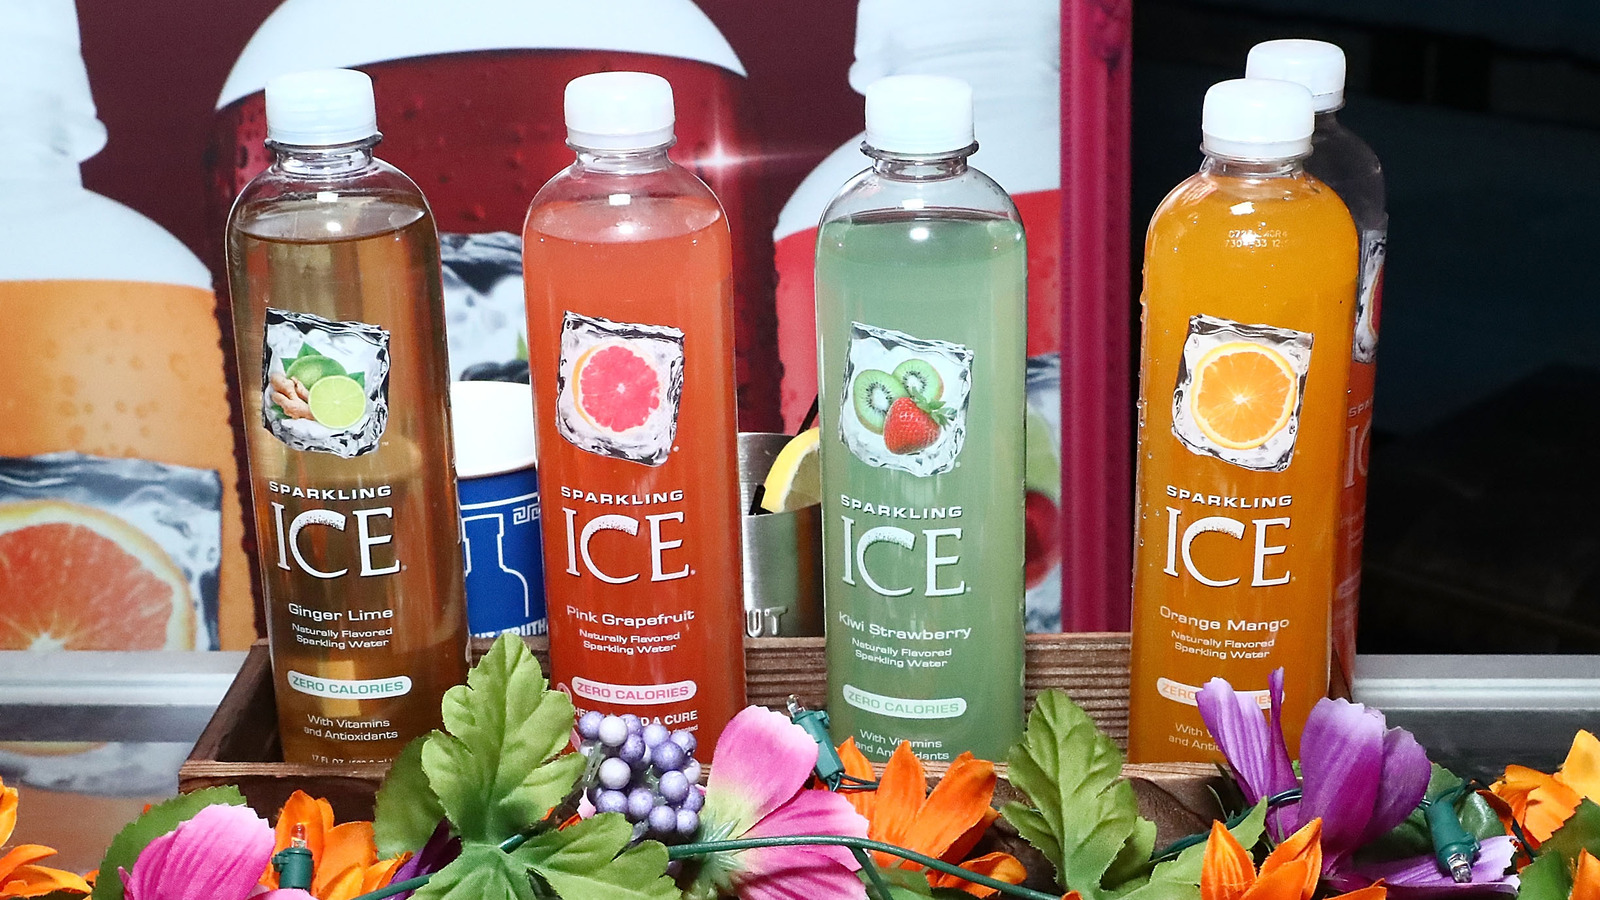 What Flavors Does Sparkling Ice Come In? 